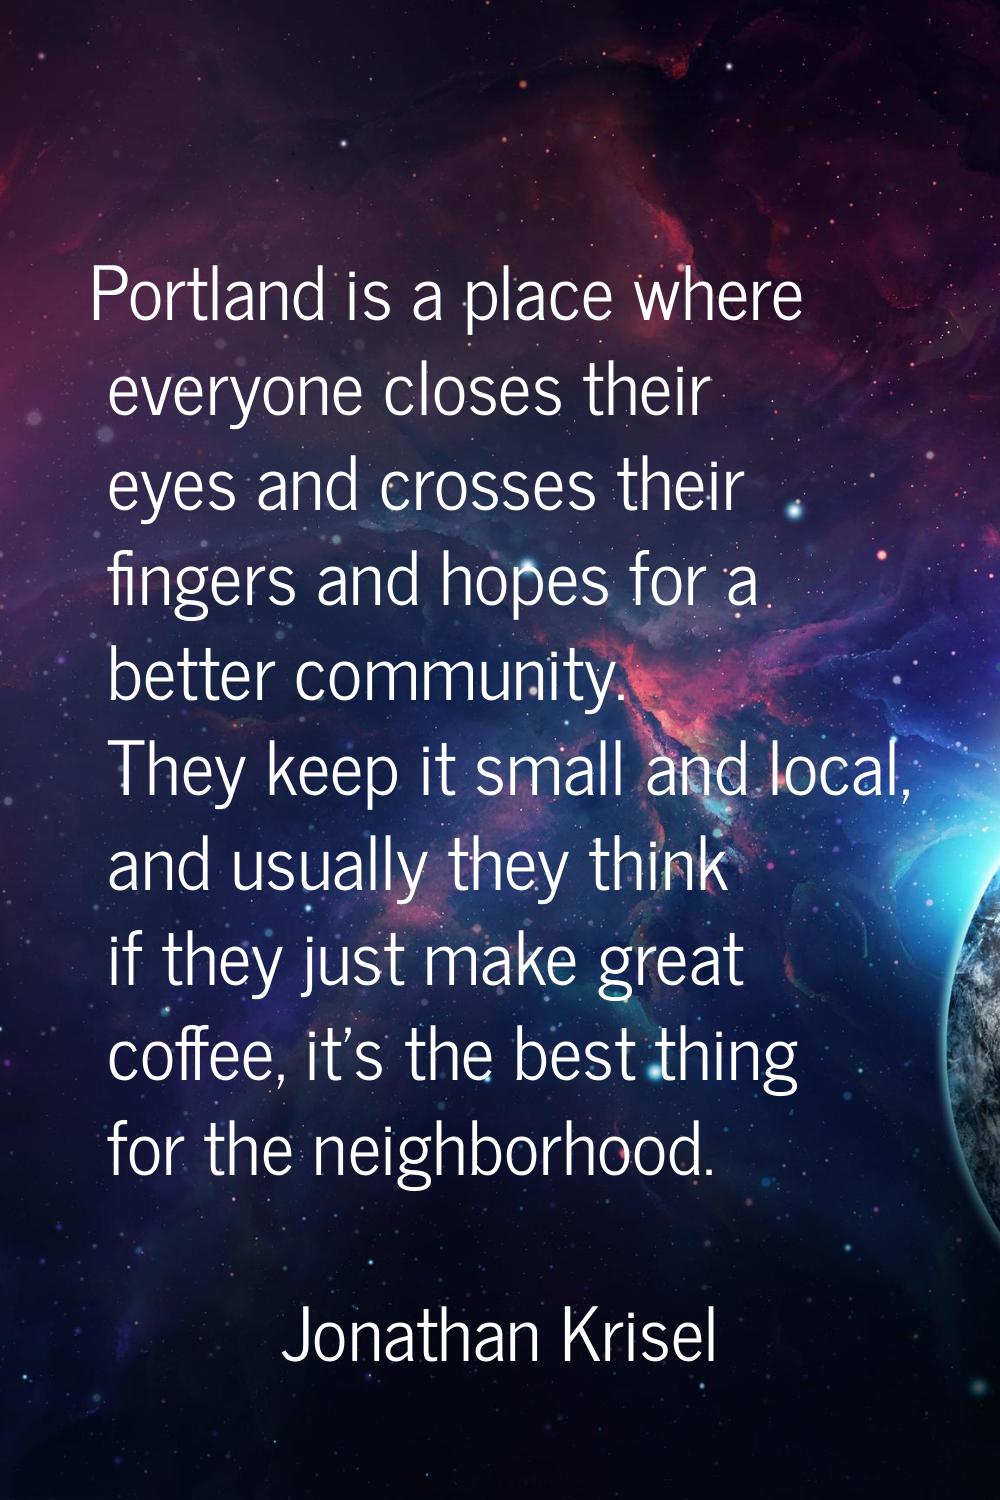 Portland is a place where everyone closes their eyes and crosses their fingers and hopes for a bett